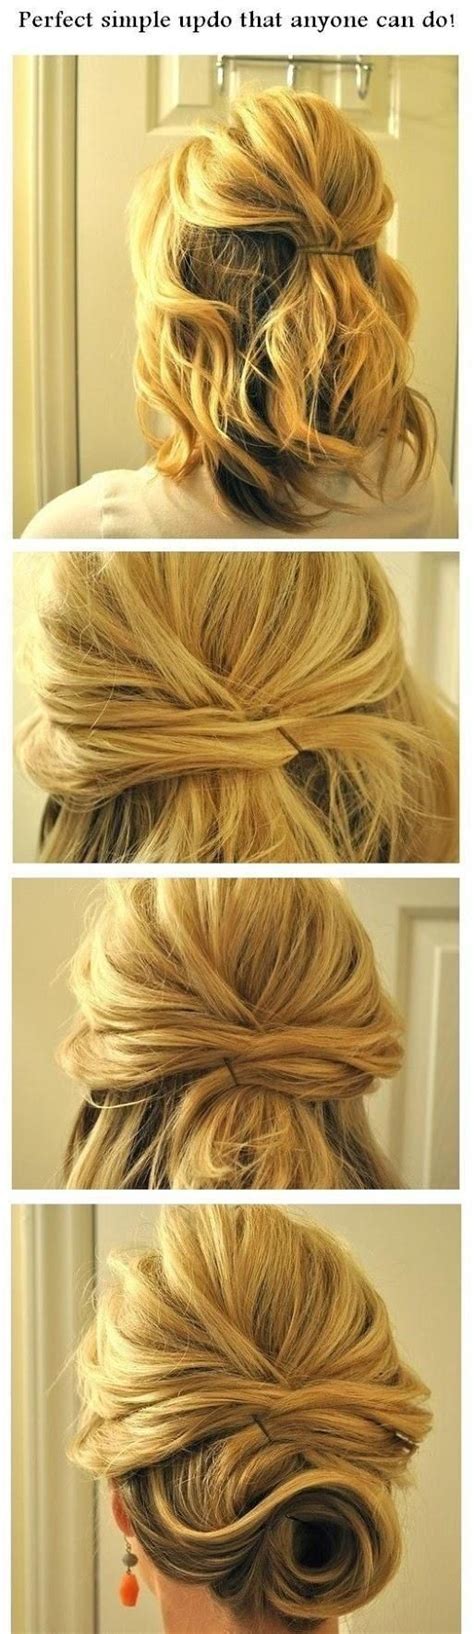 Simple hairstyle for girls | best simple hairstyles for girls. 14 Easy Step by Step Updo Hairstyles Tutorials - Pretty Designs